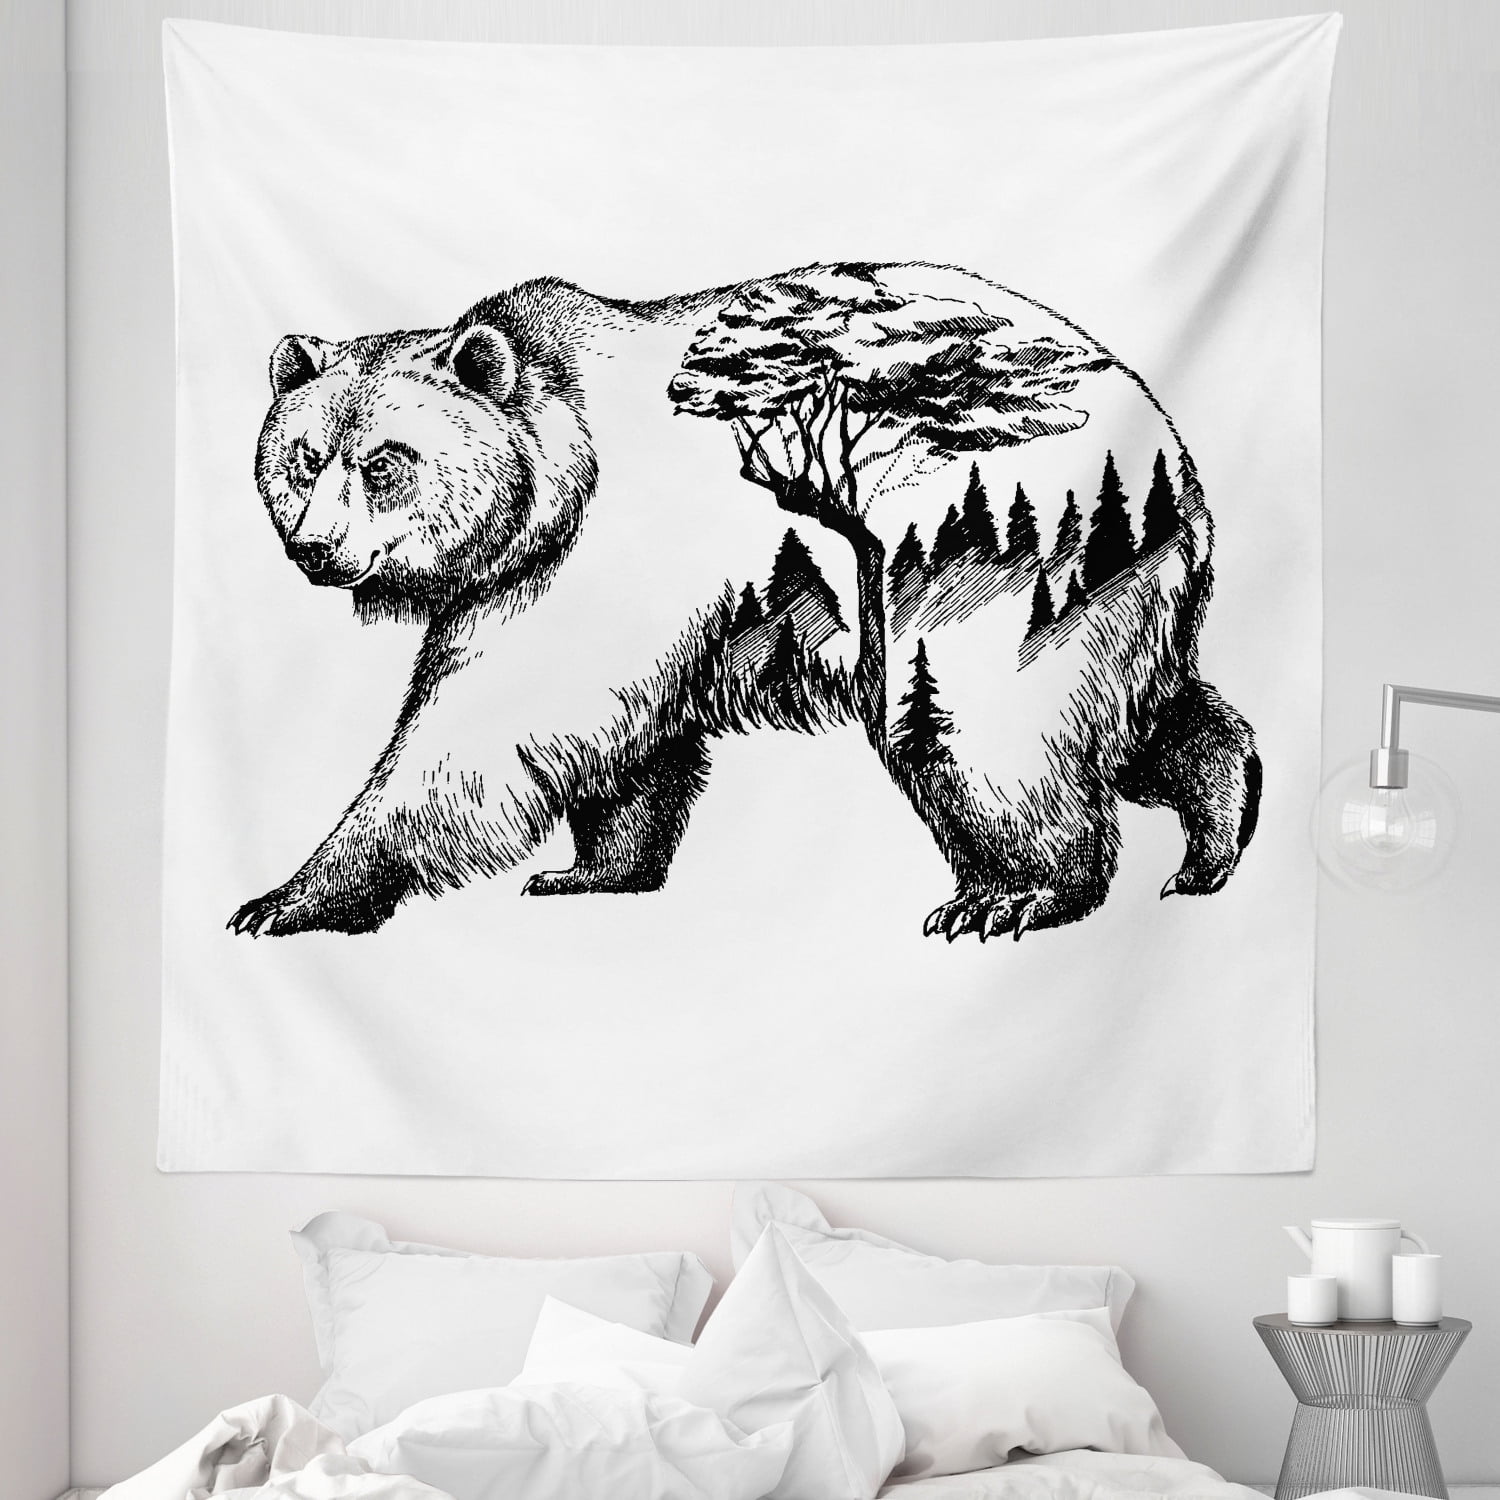 Printed in the USA Bear Tapestry Wall Hanging Mountain Bears Nature Wildlife Tapestries Dorm Room Bedroom Decor Art Small to Giant Sizes 